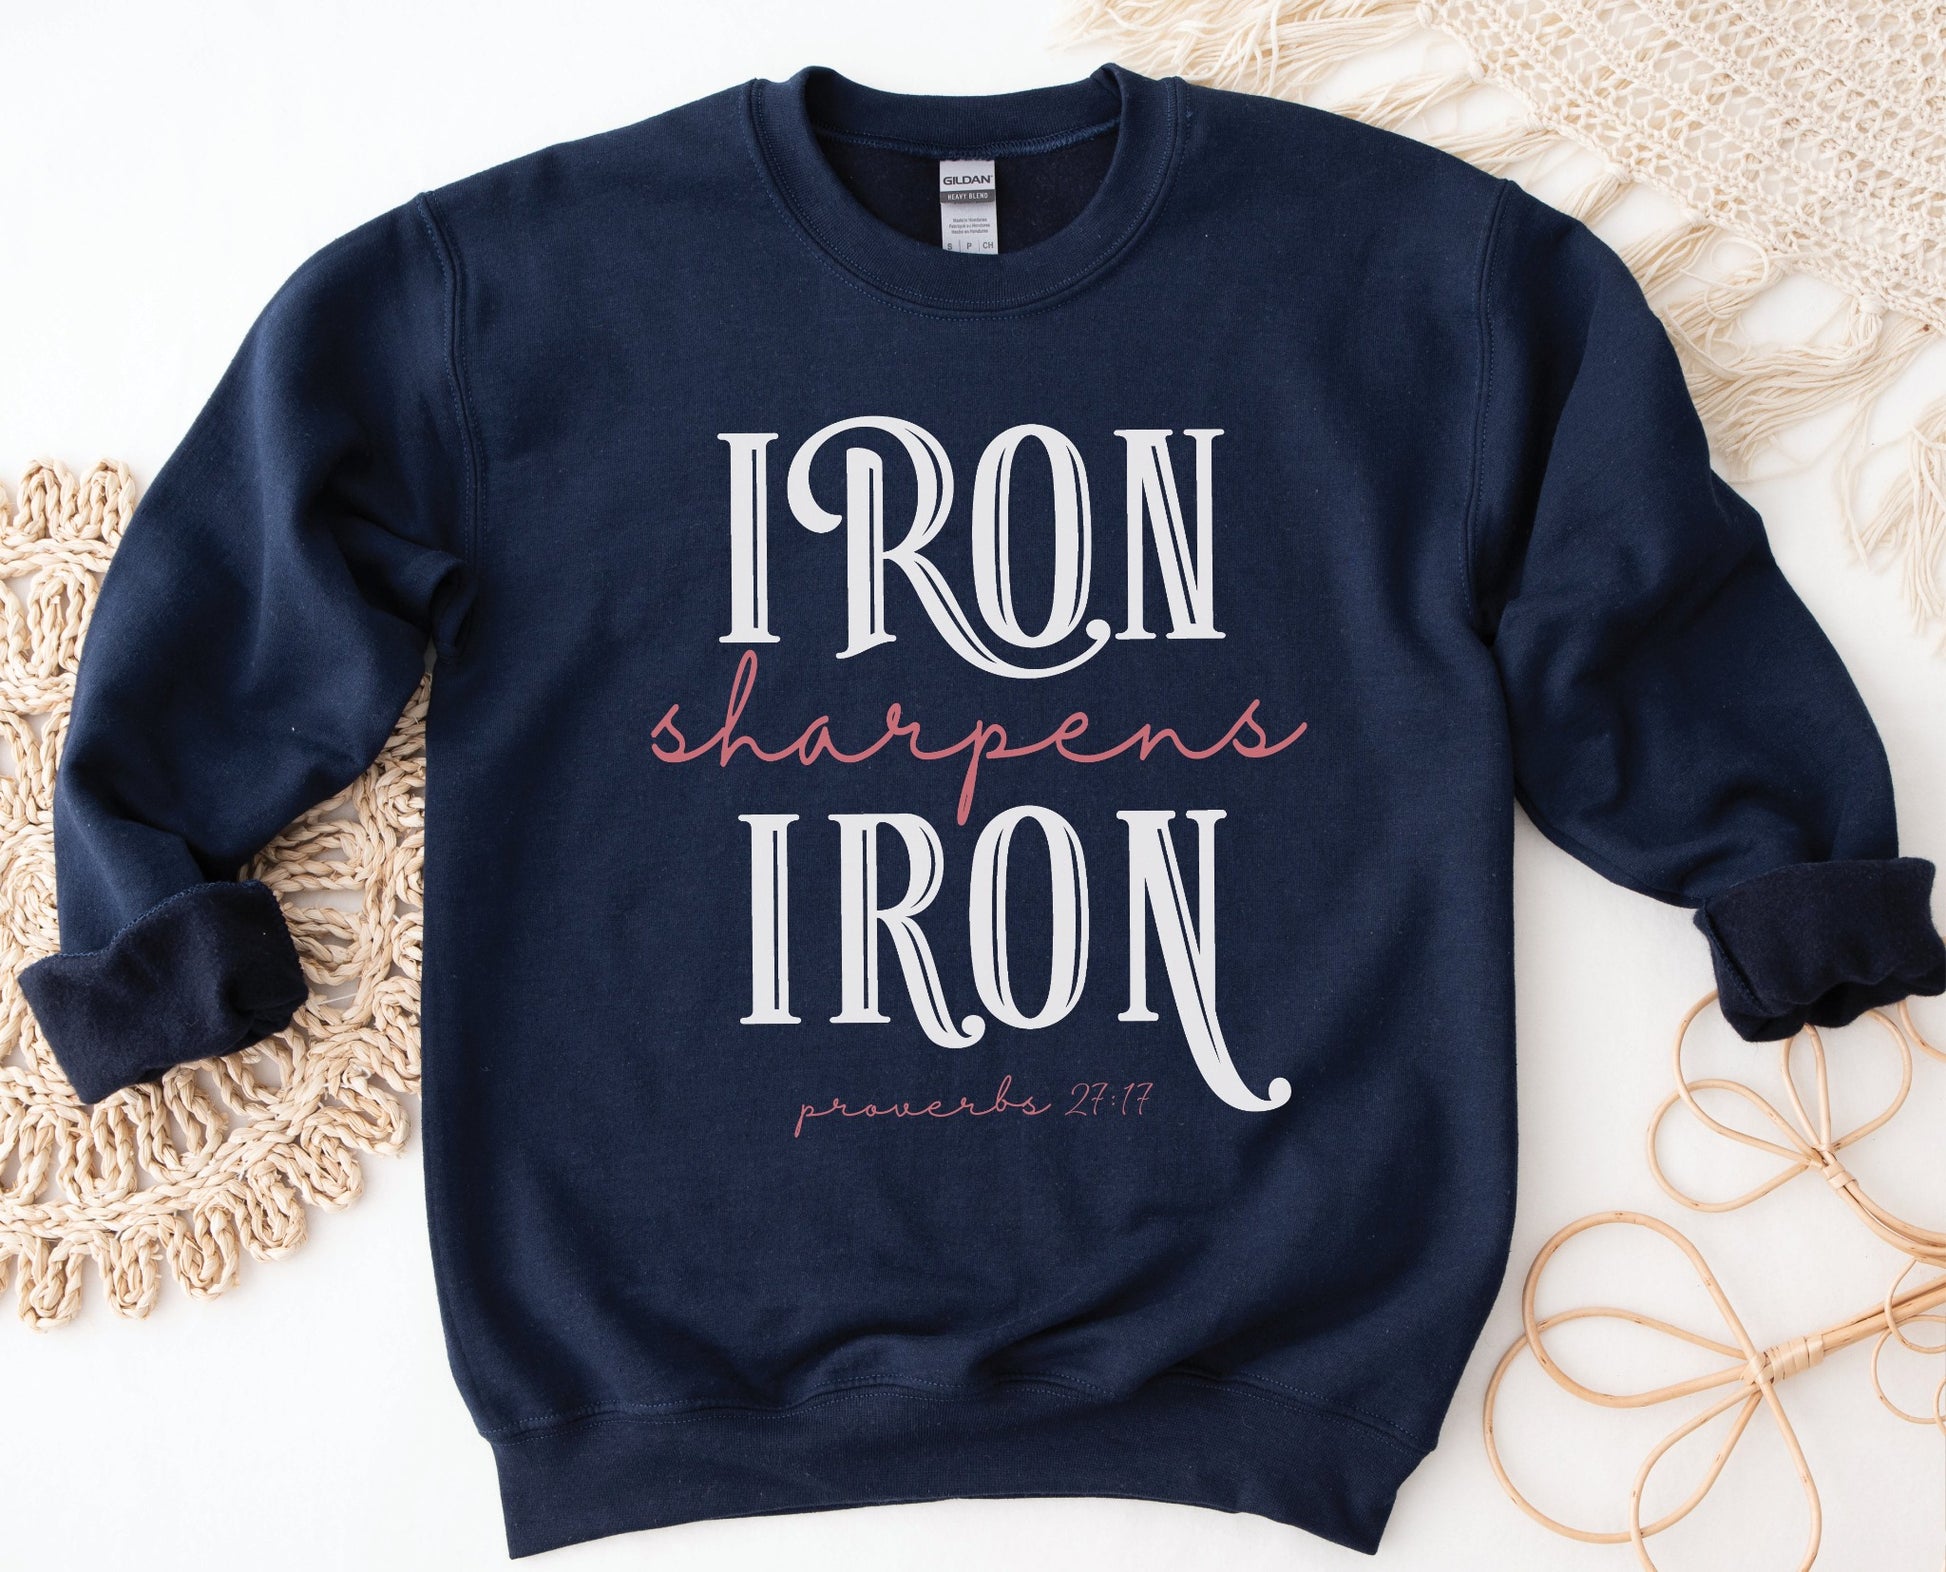 Iron Sharpens Iron Proverbs 27:17 Christian aesthetic design printed in white and mauve on cozy navy blue unisex crewneck sweatshirt for women's groups